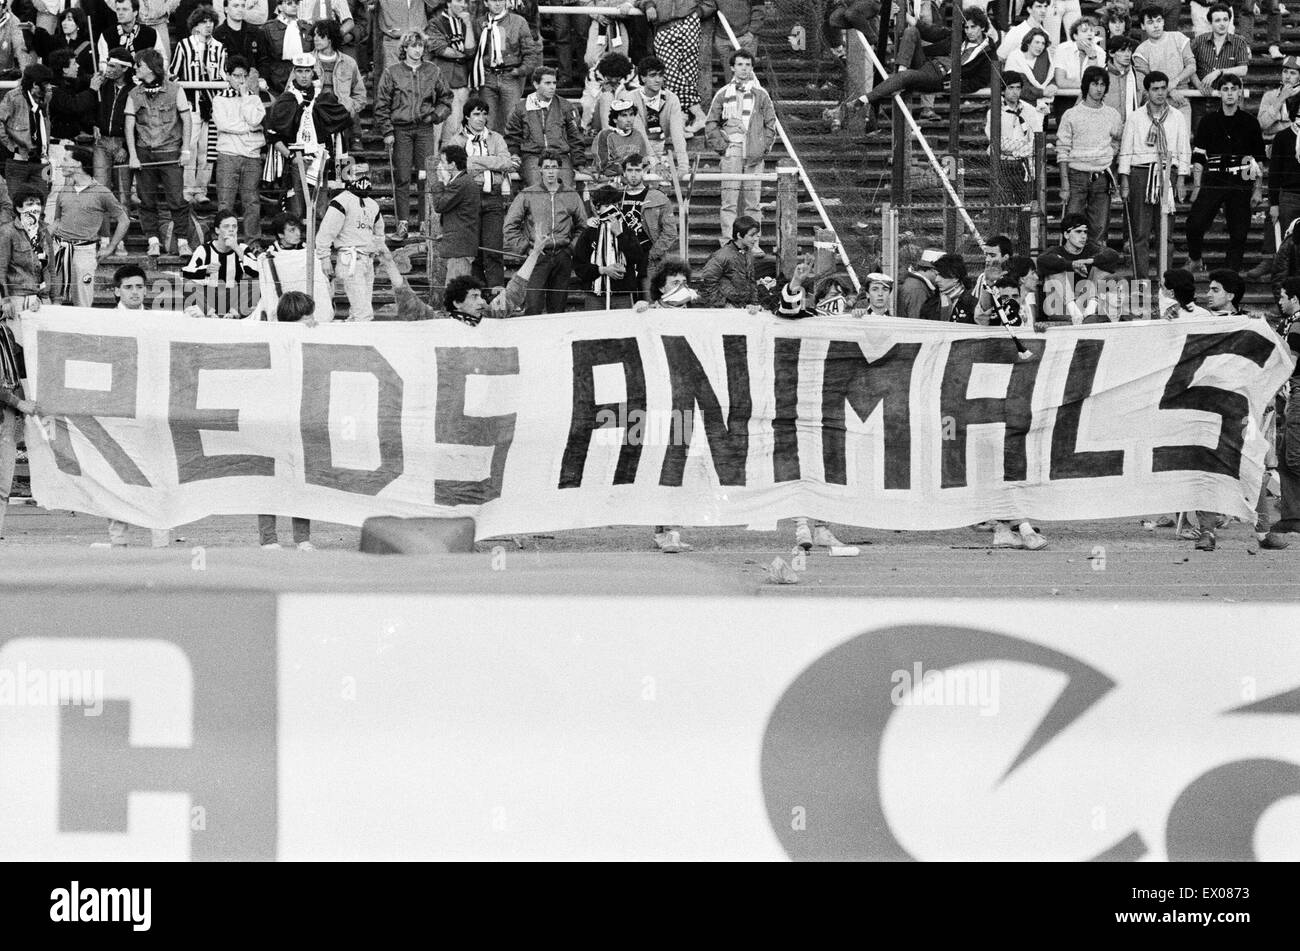 Juventus 1-0 Liverpool, 1985 European Cup Final, Heysel Stadium, Brussels, Wednesday 29th May 1985. Crowd Violence.  Red Animals Banner. Stock Photo